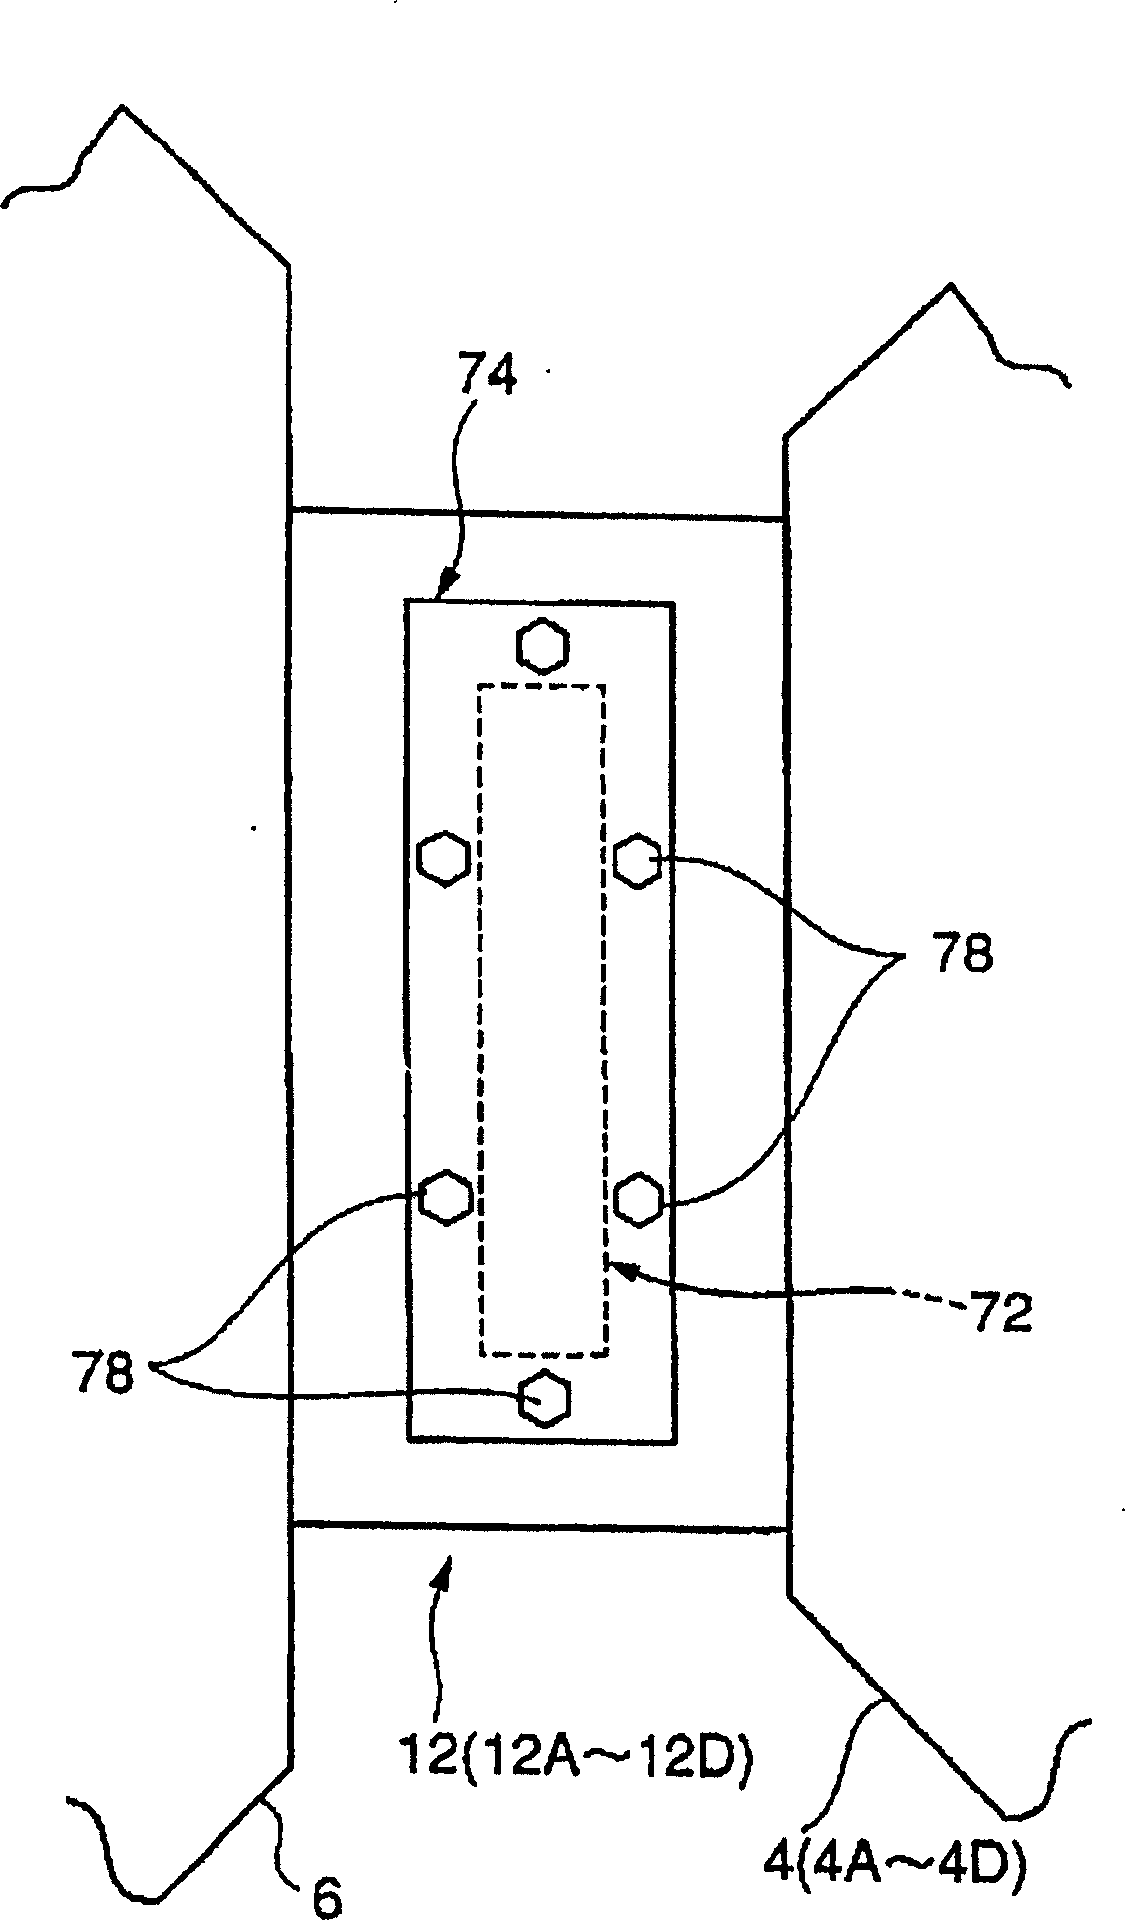 Replacing method of valv device, processing system and sealing components